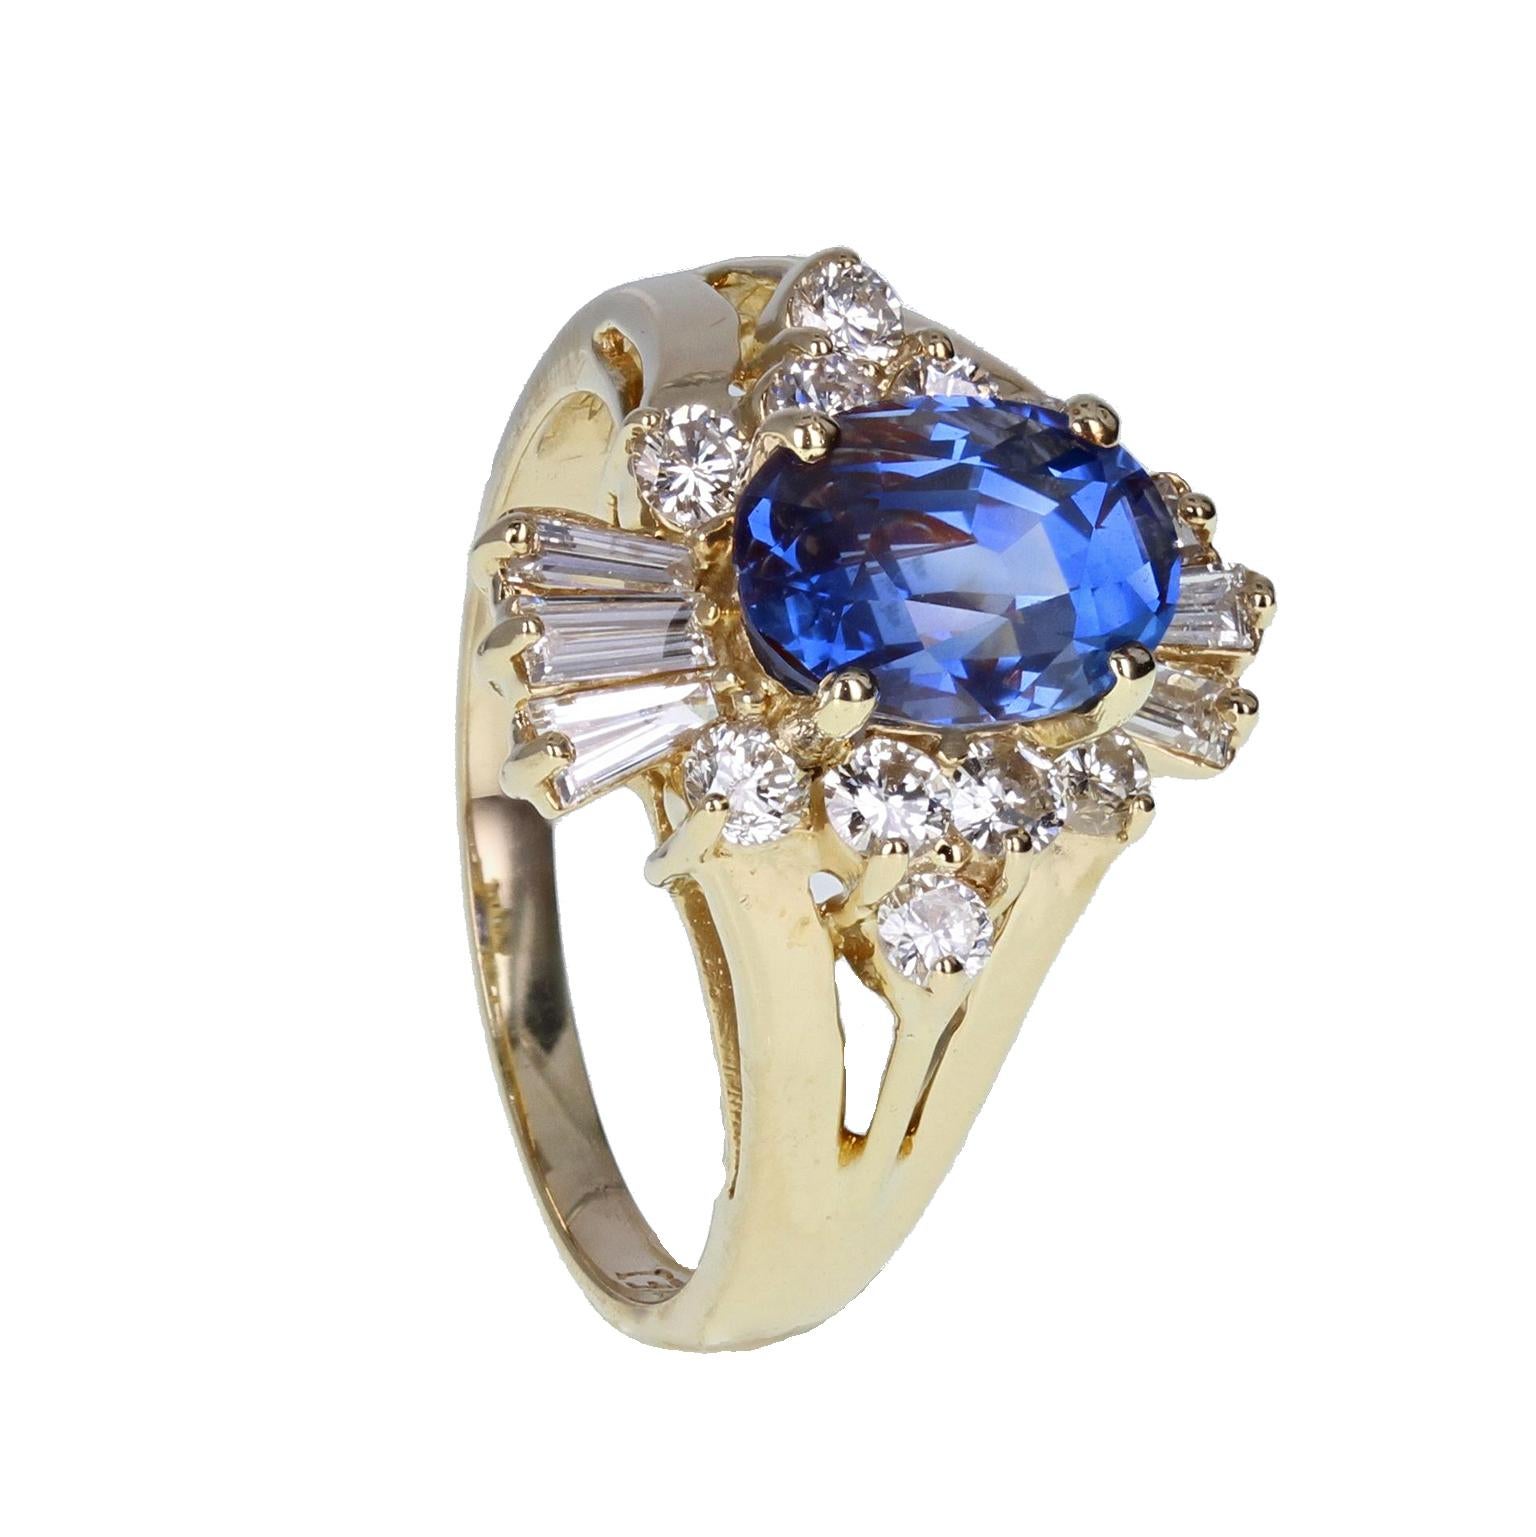 A beautifully crafted sapphire and diamond cluster ring. The central oval-cut blue sapphire of approximately 2.30 carats mounted in four 14-carat gold claws. Surrounded by a cluster of brilliant-cut diamonds and two fan motifs of tapered